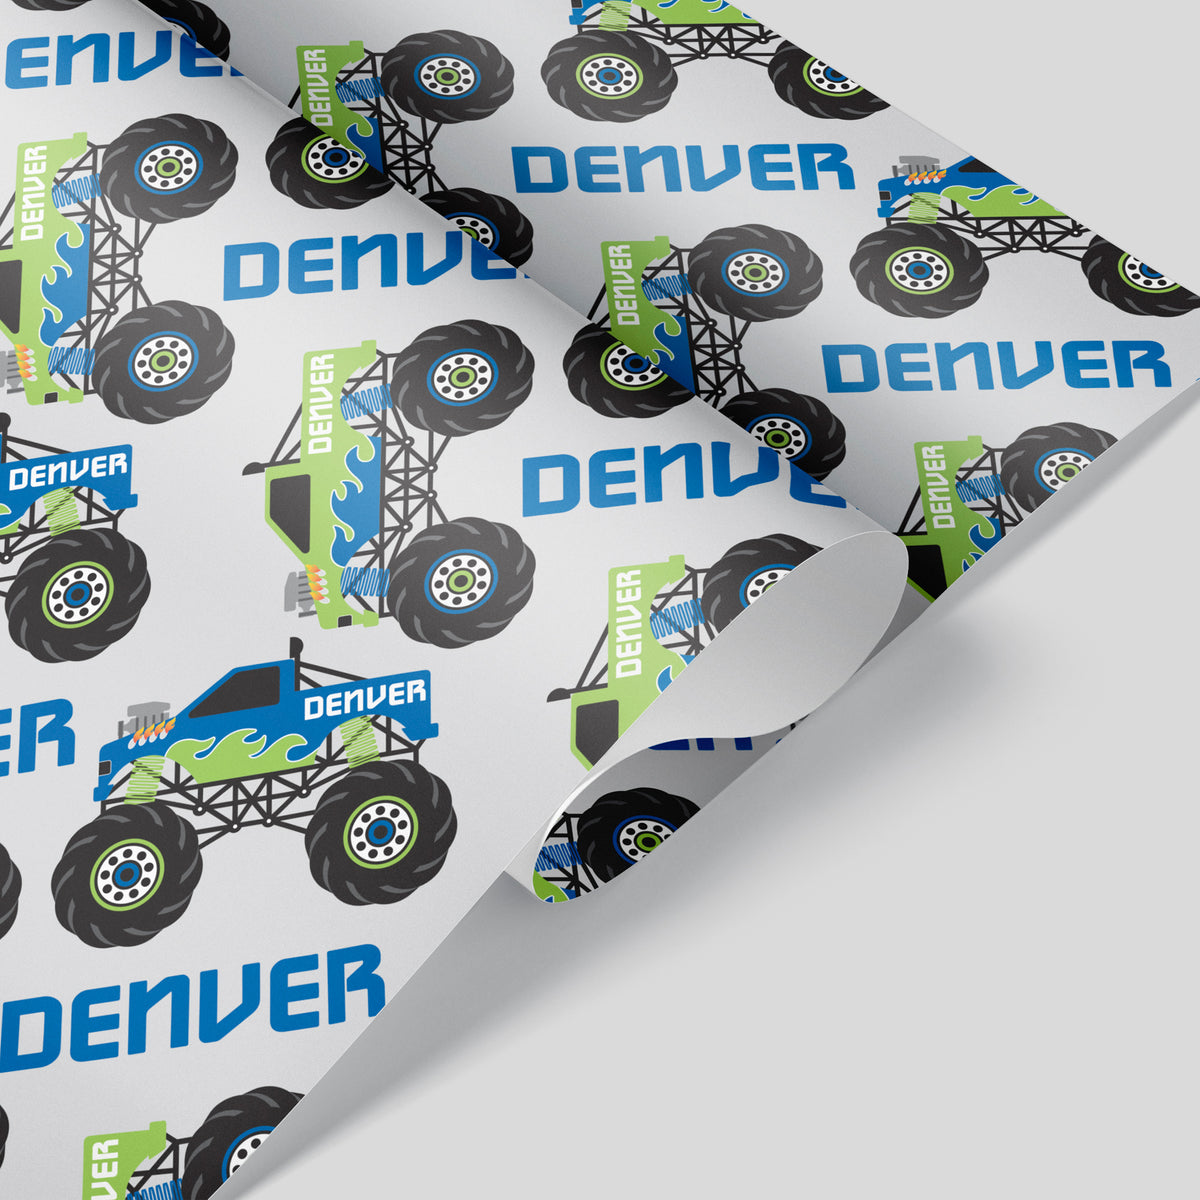 Monster Truck Name Wrapping Paper - GREEN/BLUE